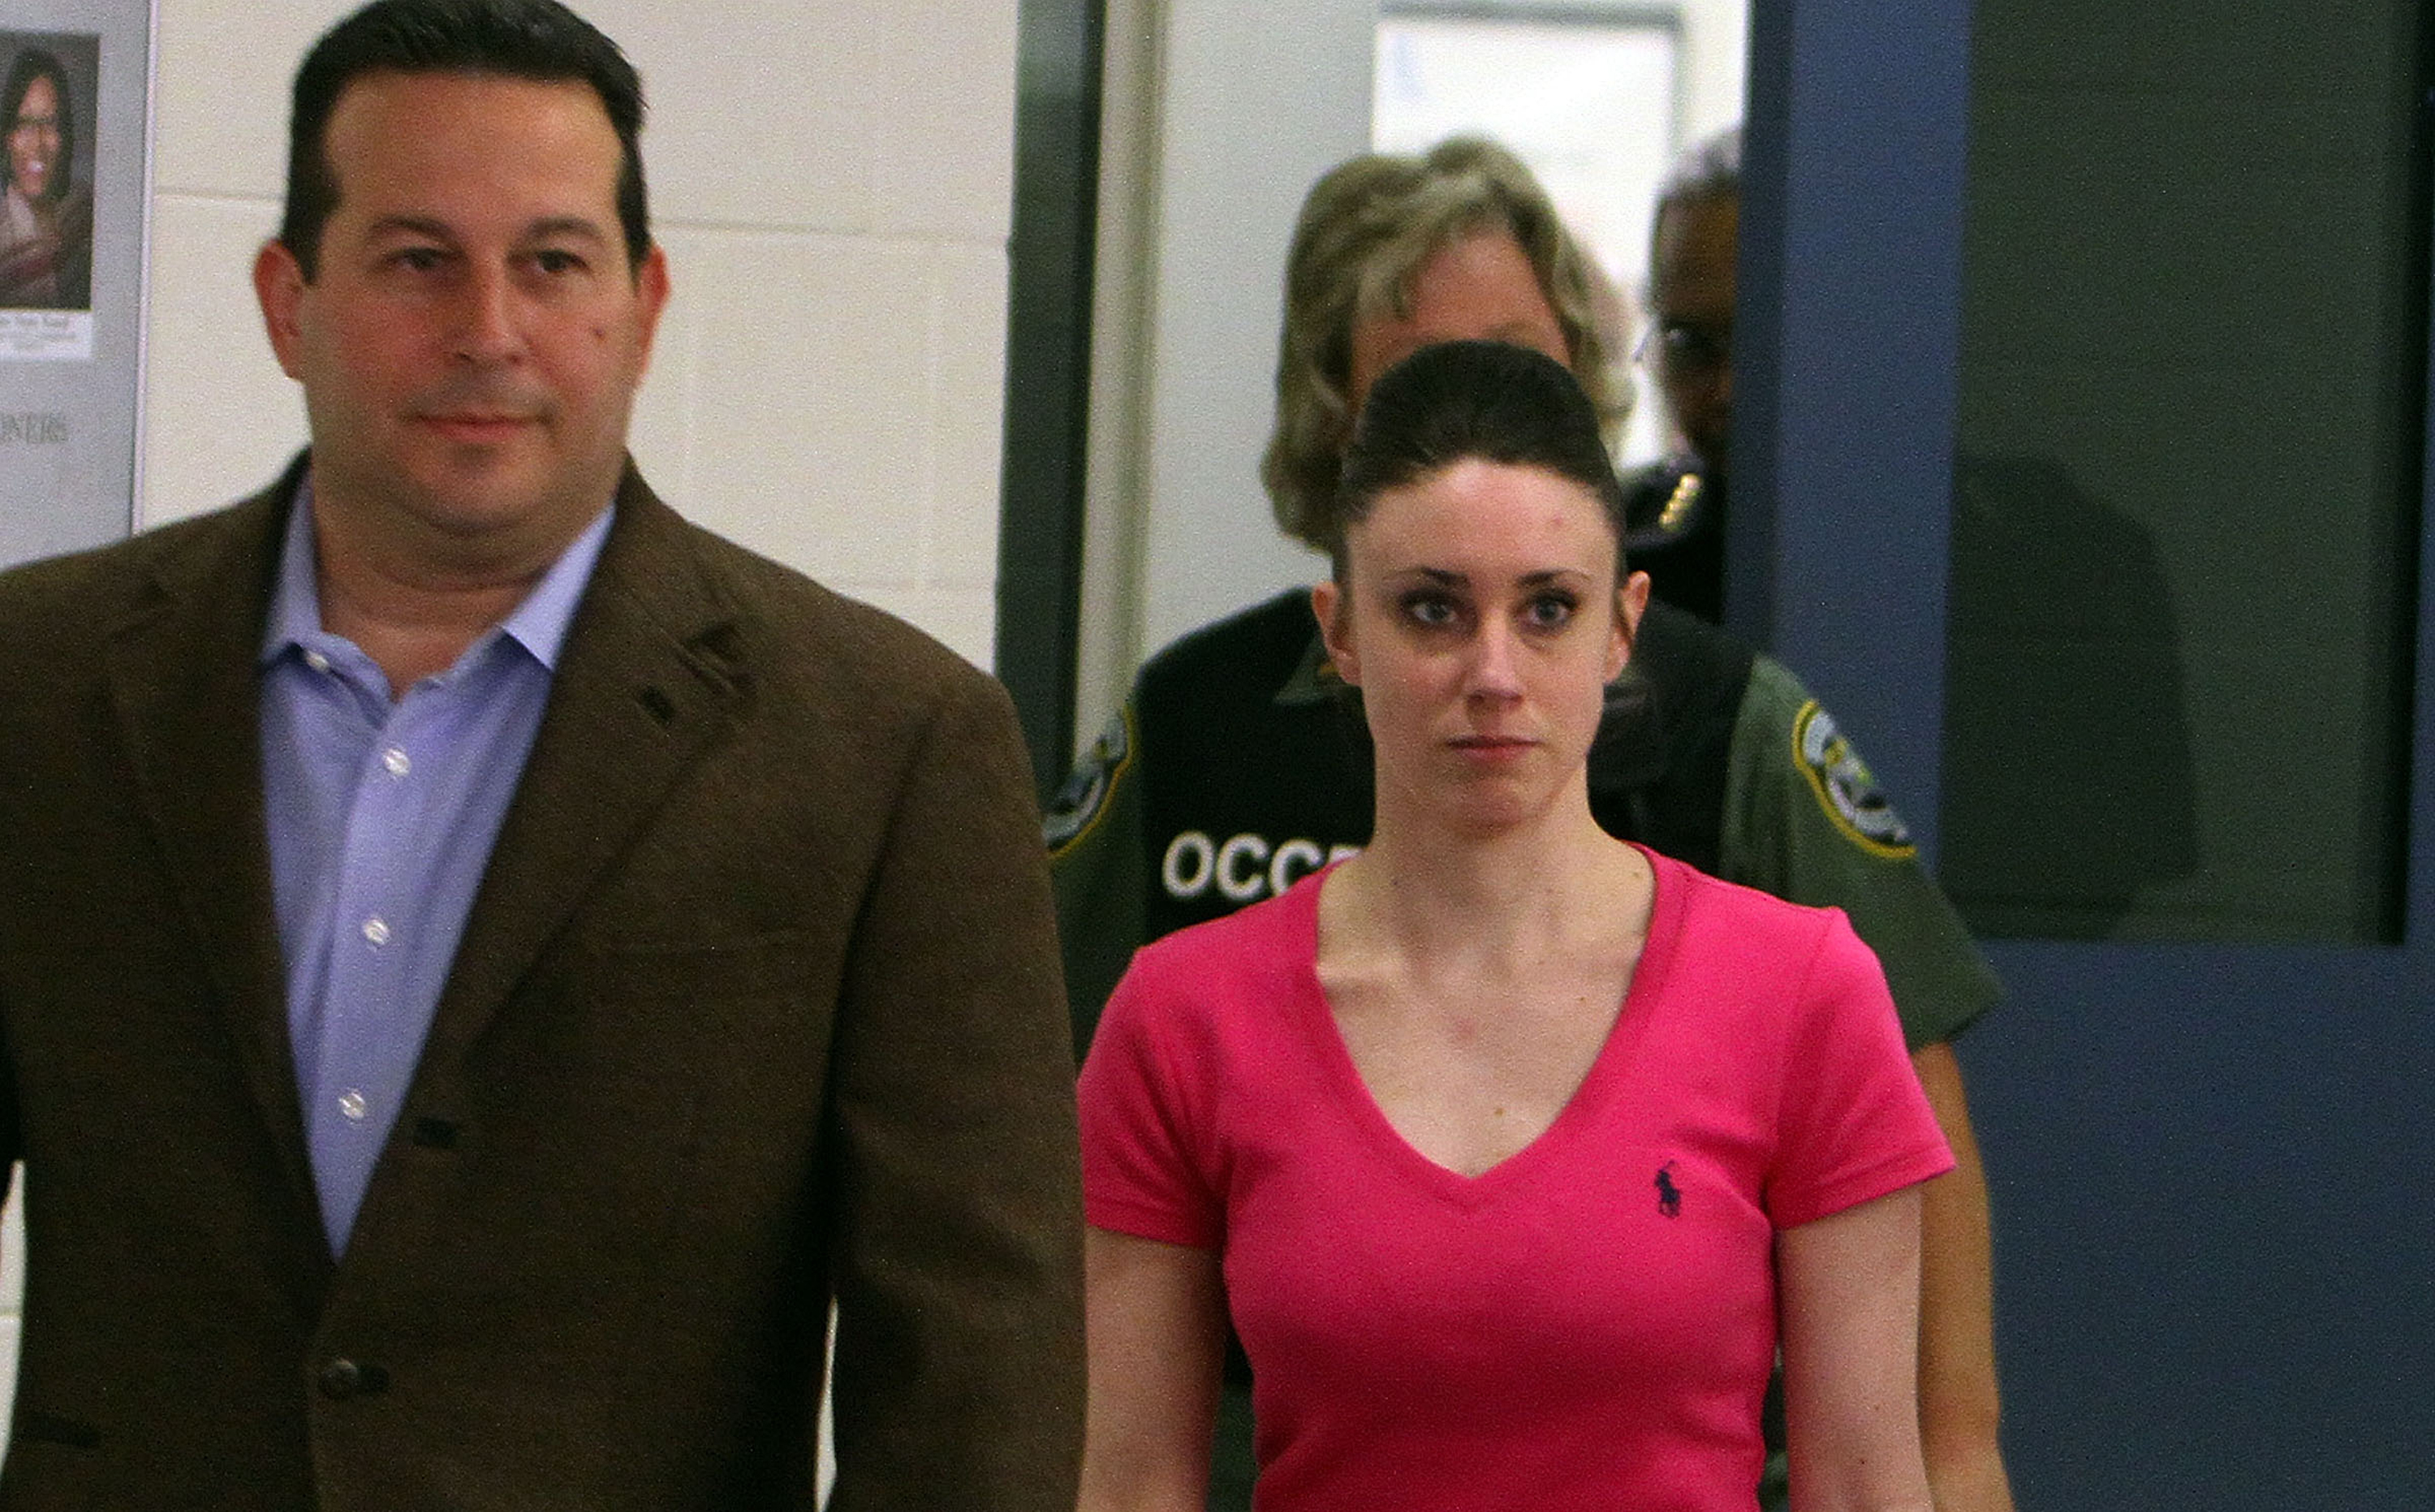 Casey Anthony Sex Tape Porn - How Did Casey Anthony Pay for Her Lawyer? With Sex, Claims ...